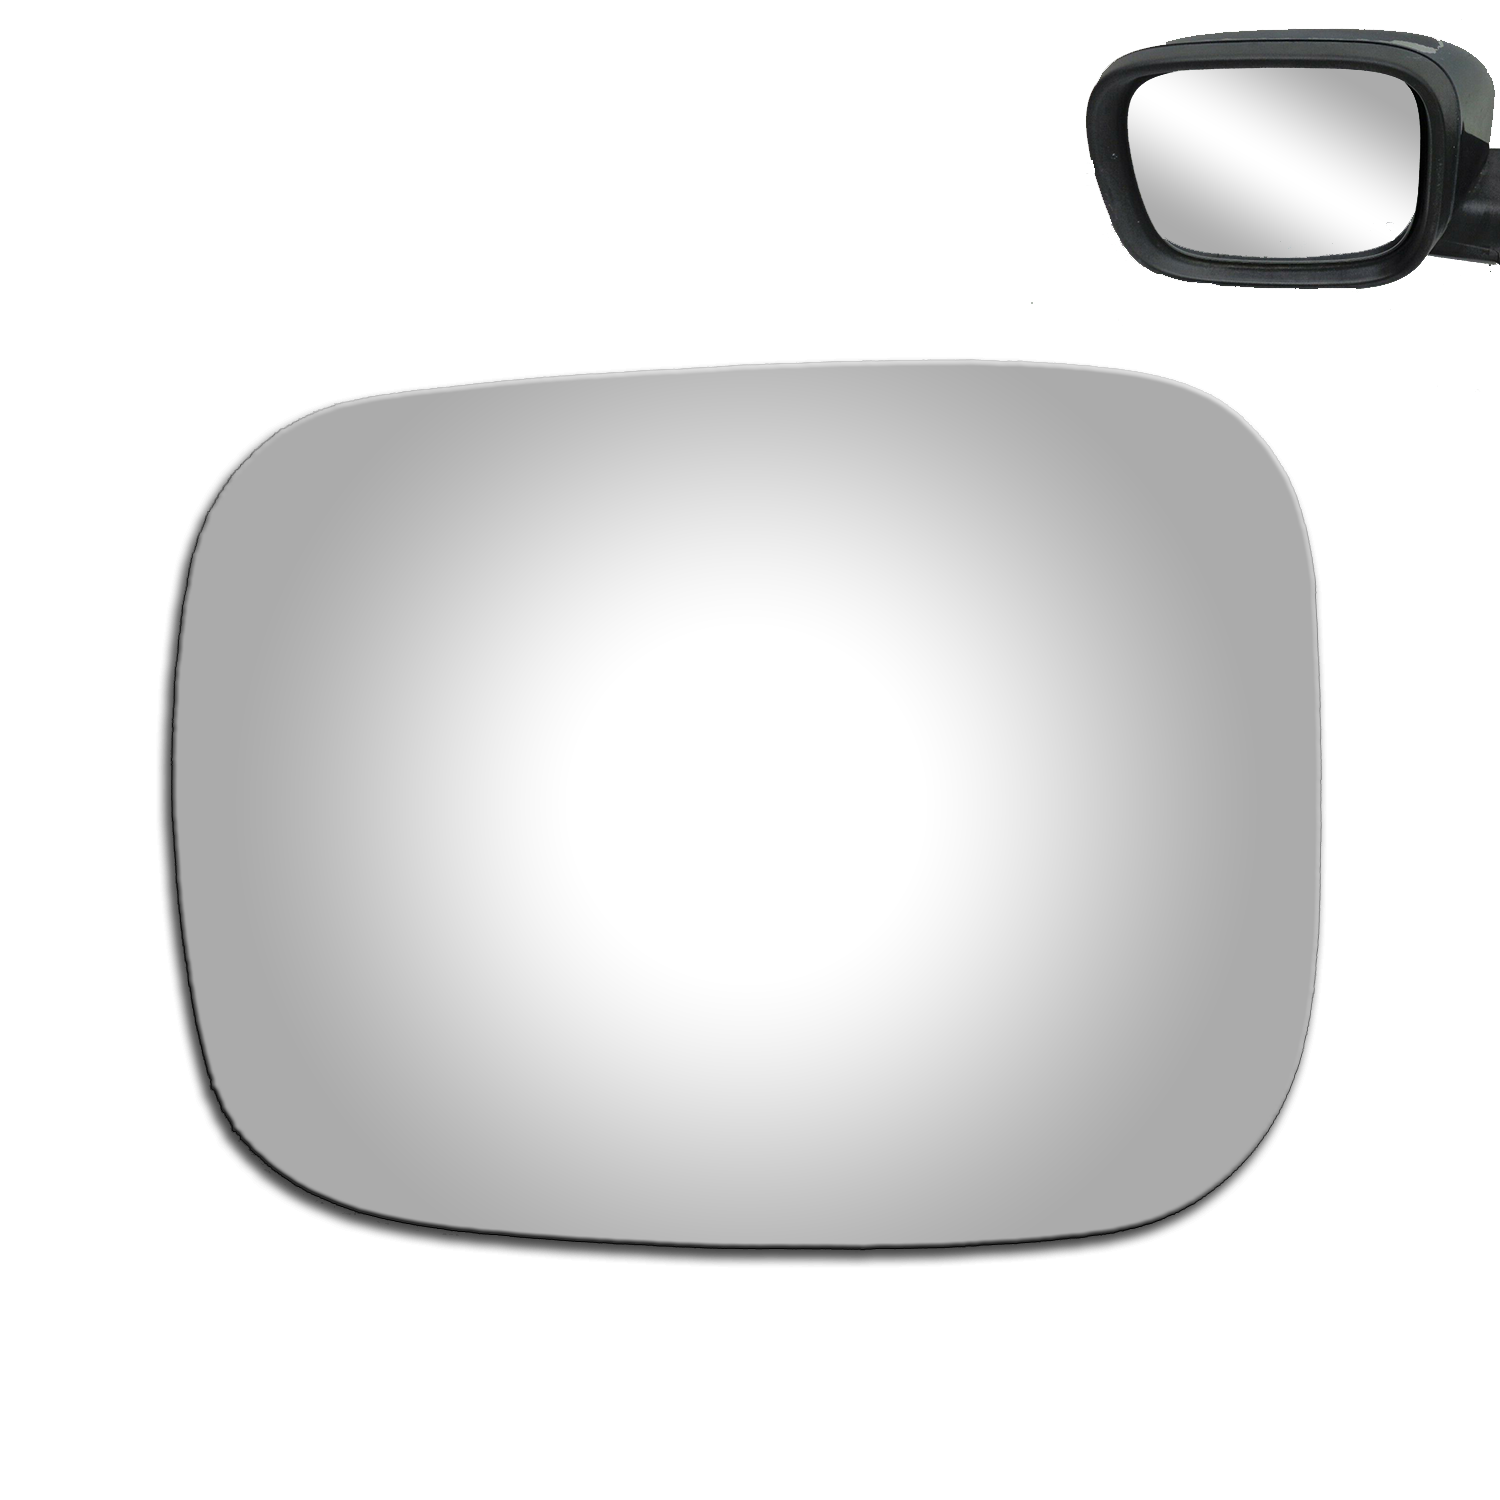 WLLW Replacement Mirror Glass for Volvo 2007-2010 V70/2007-2010 XC70/2007-2014 XC90, Driver Left Side LH/Passenger Right Side RH/The Both Sides Flat Convex M-0083